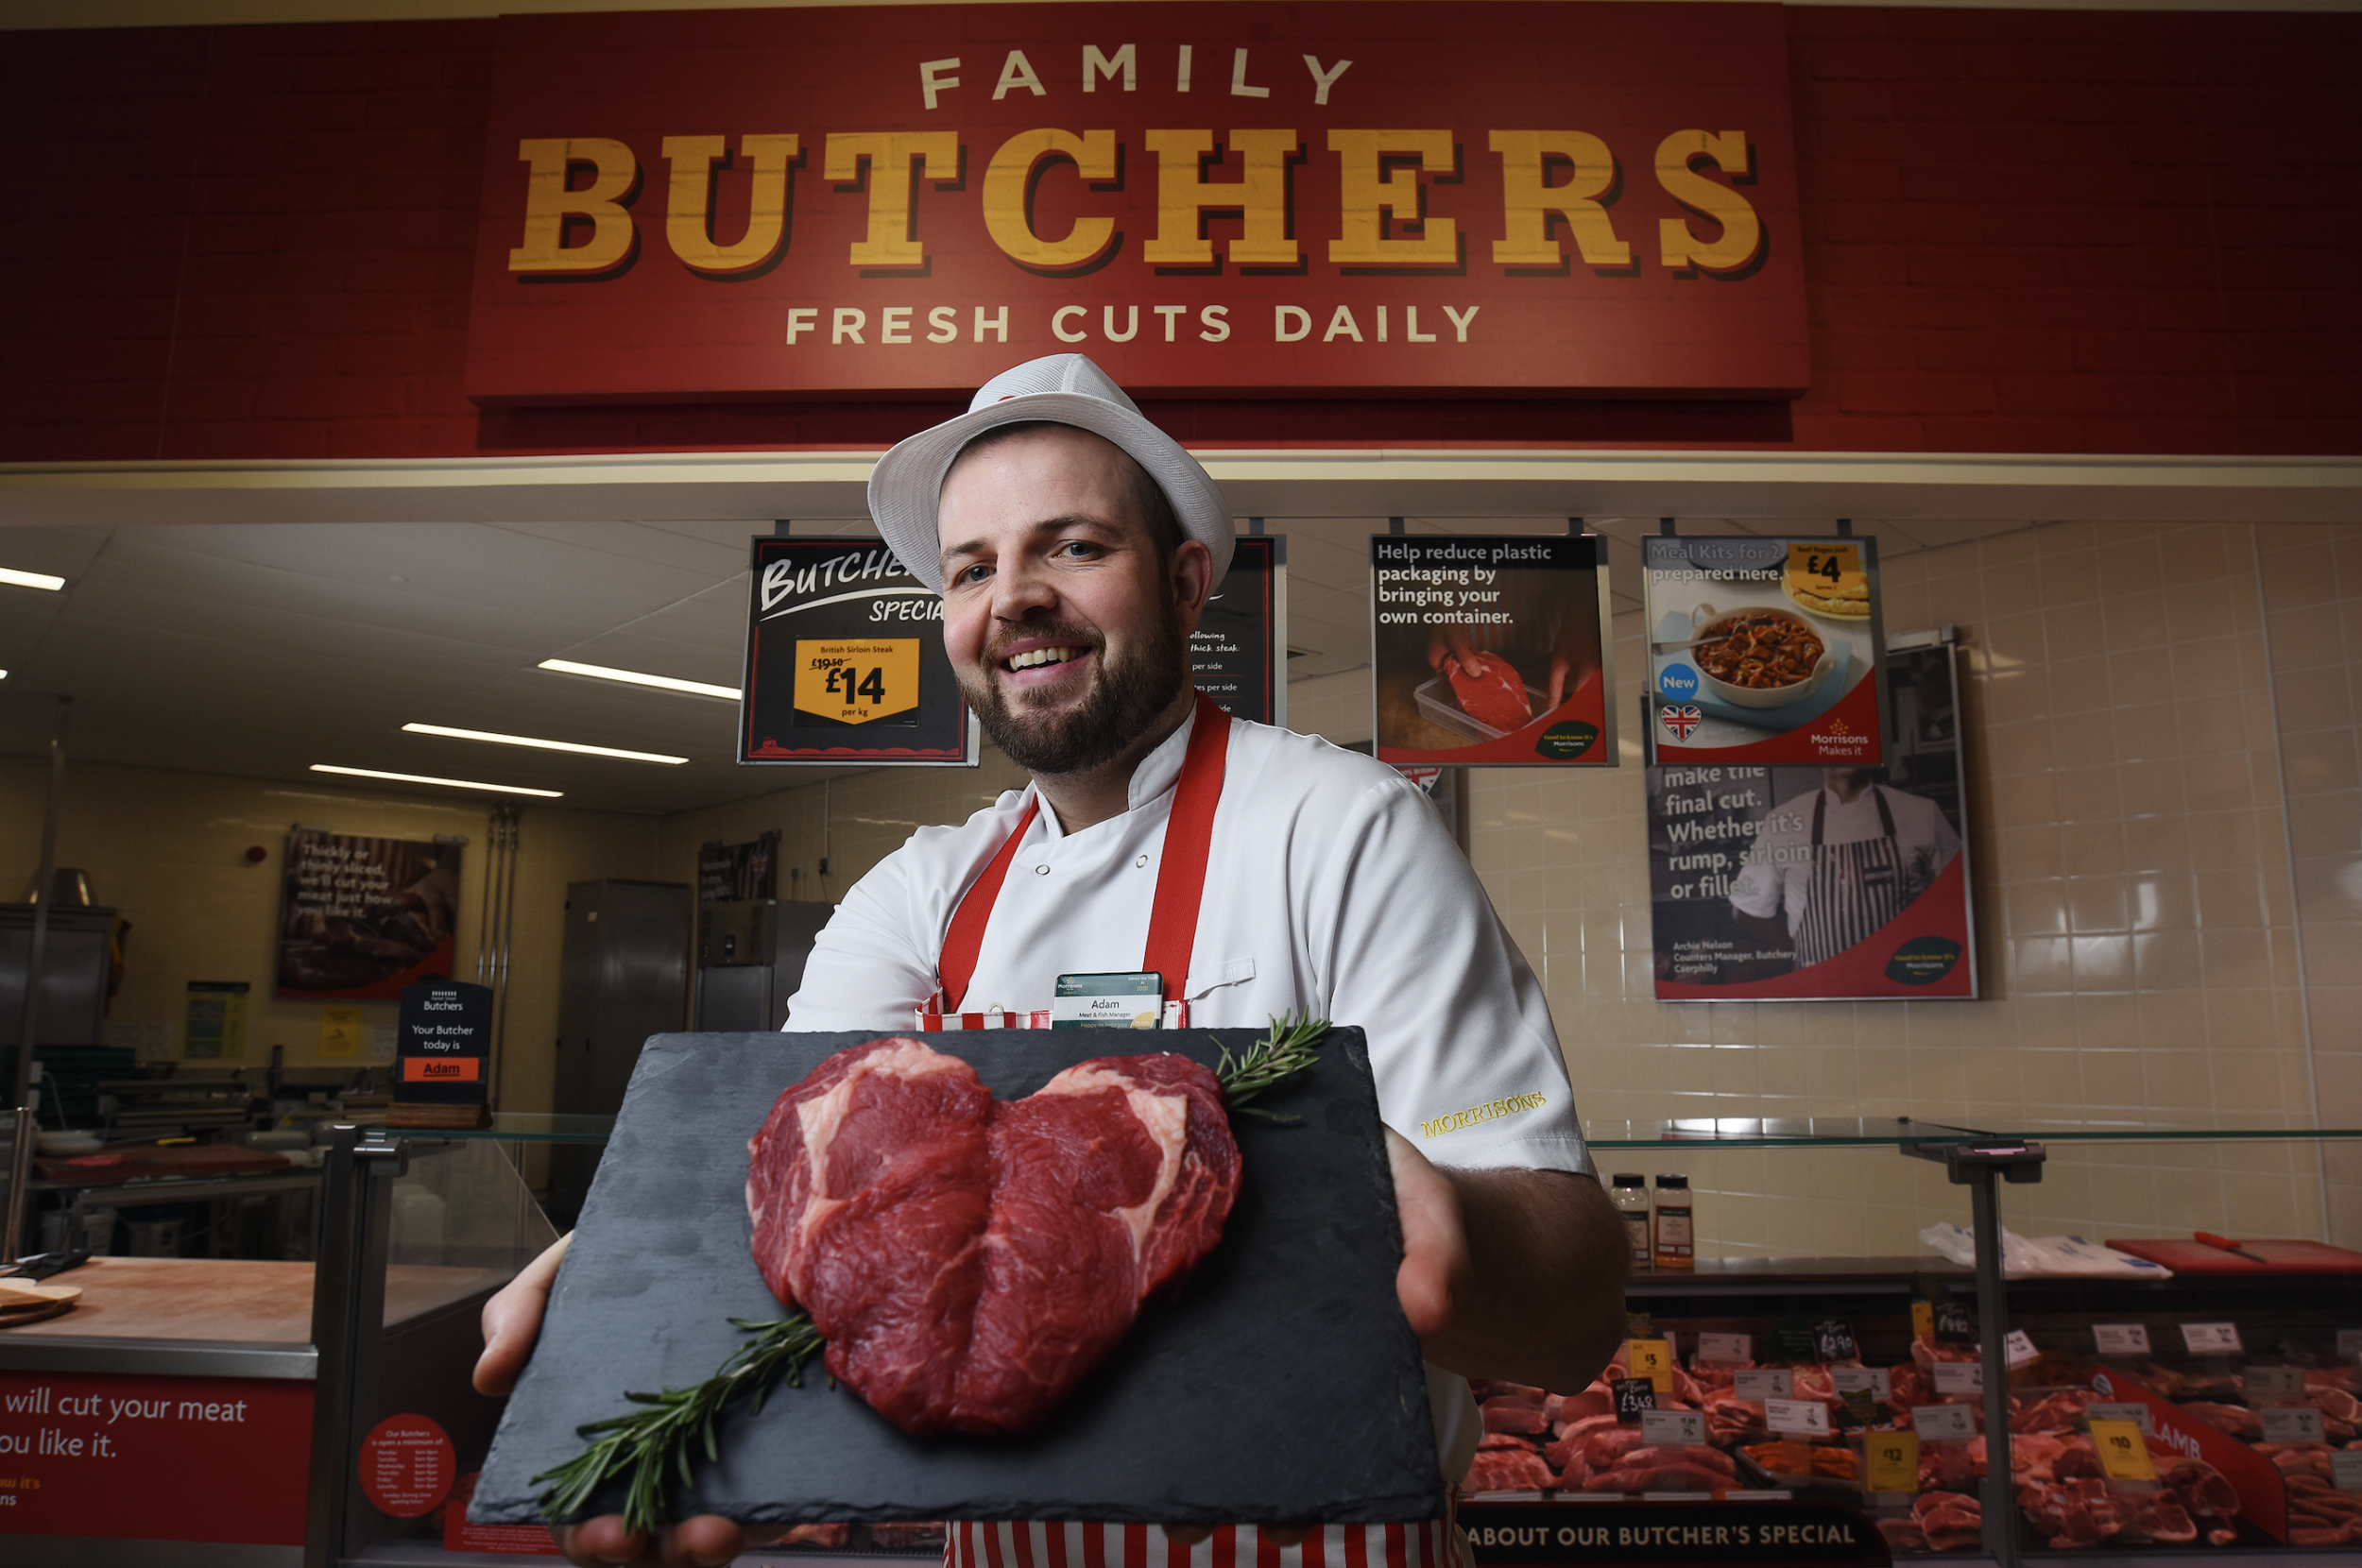 The steaks will be prepared by Morrison's butchers to ensure none of the meat is wasted (Morrison's)